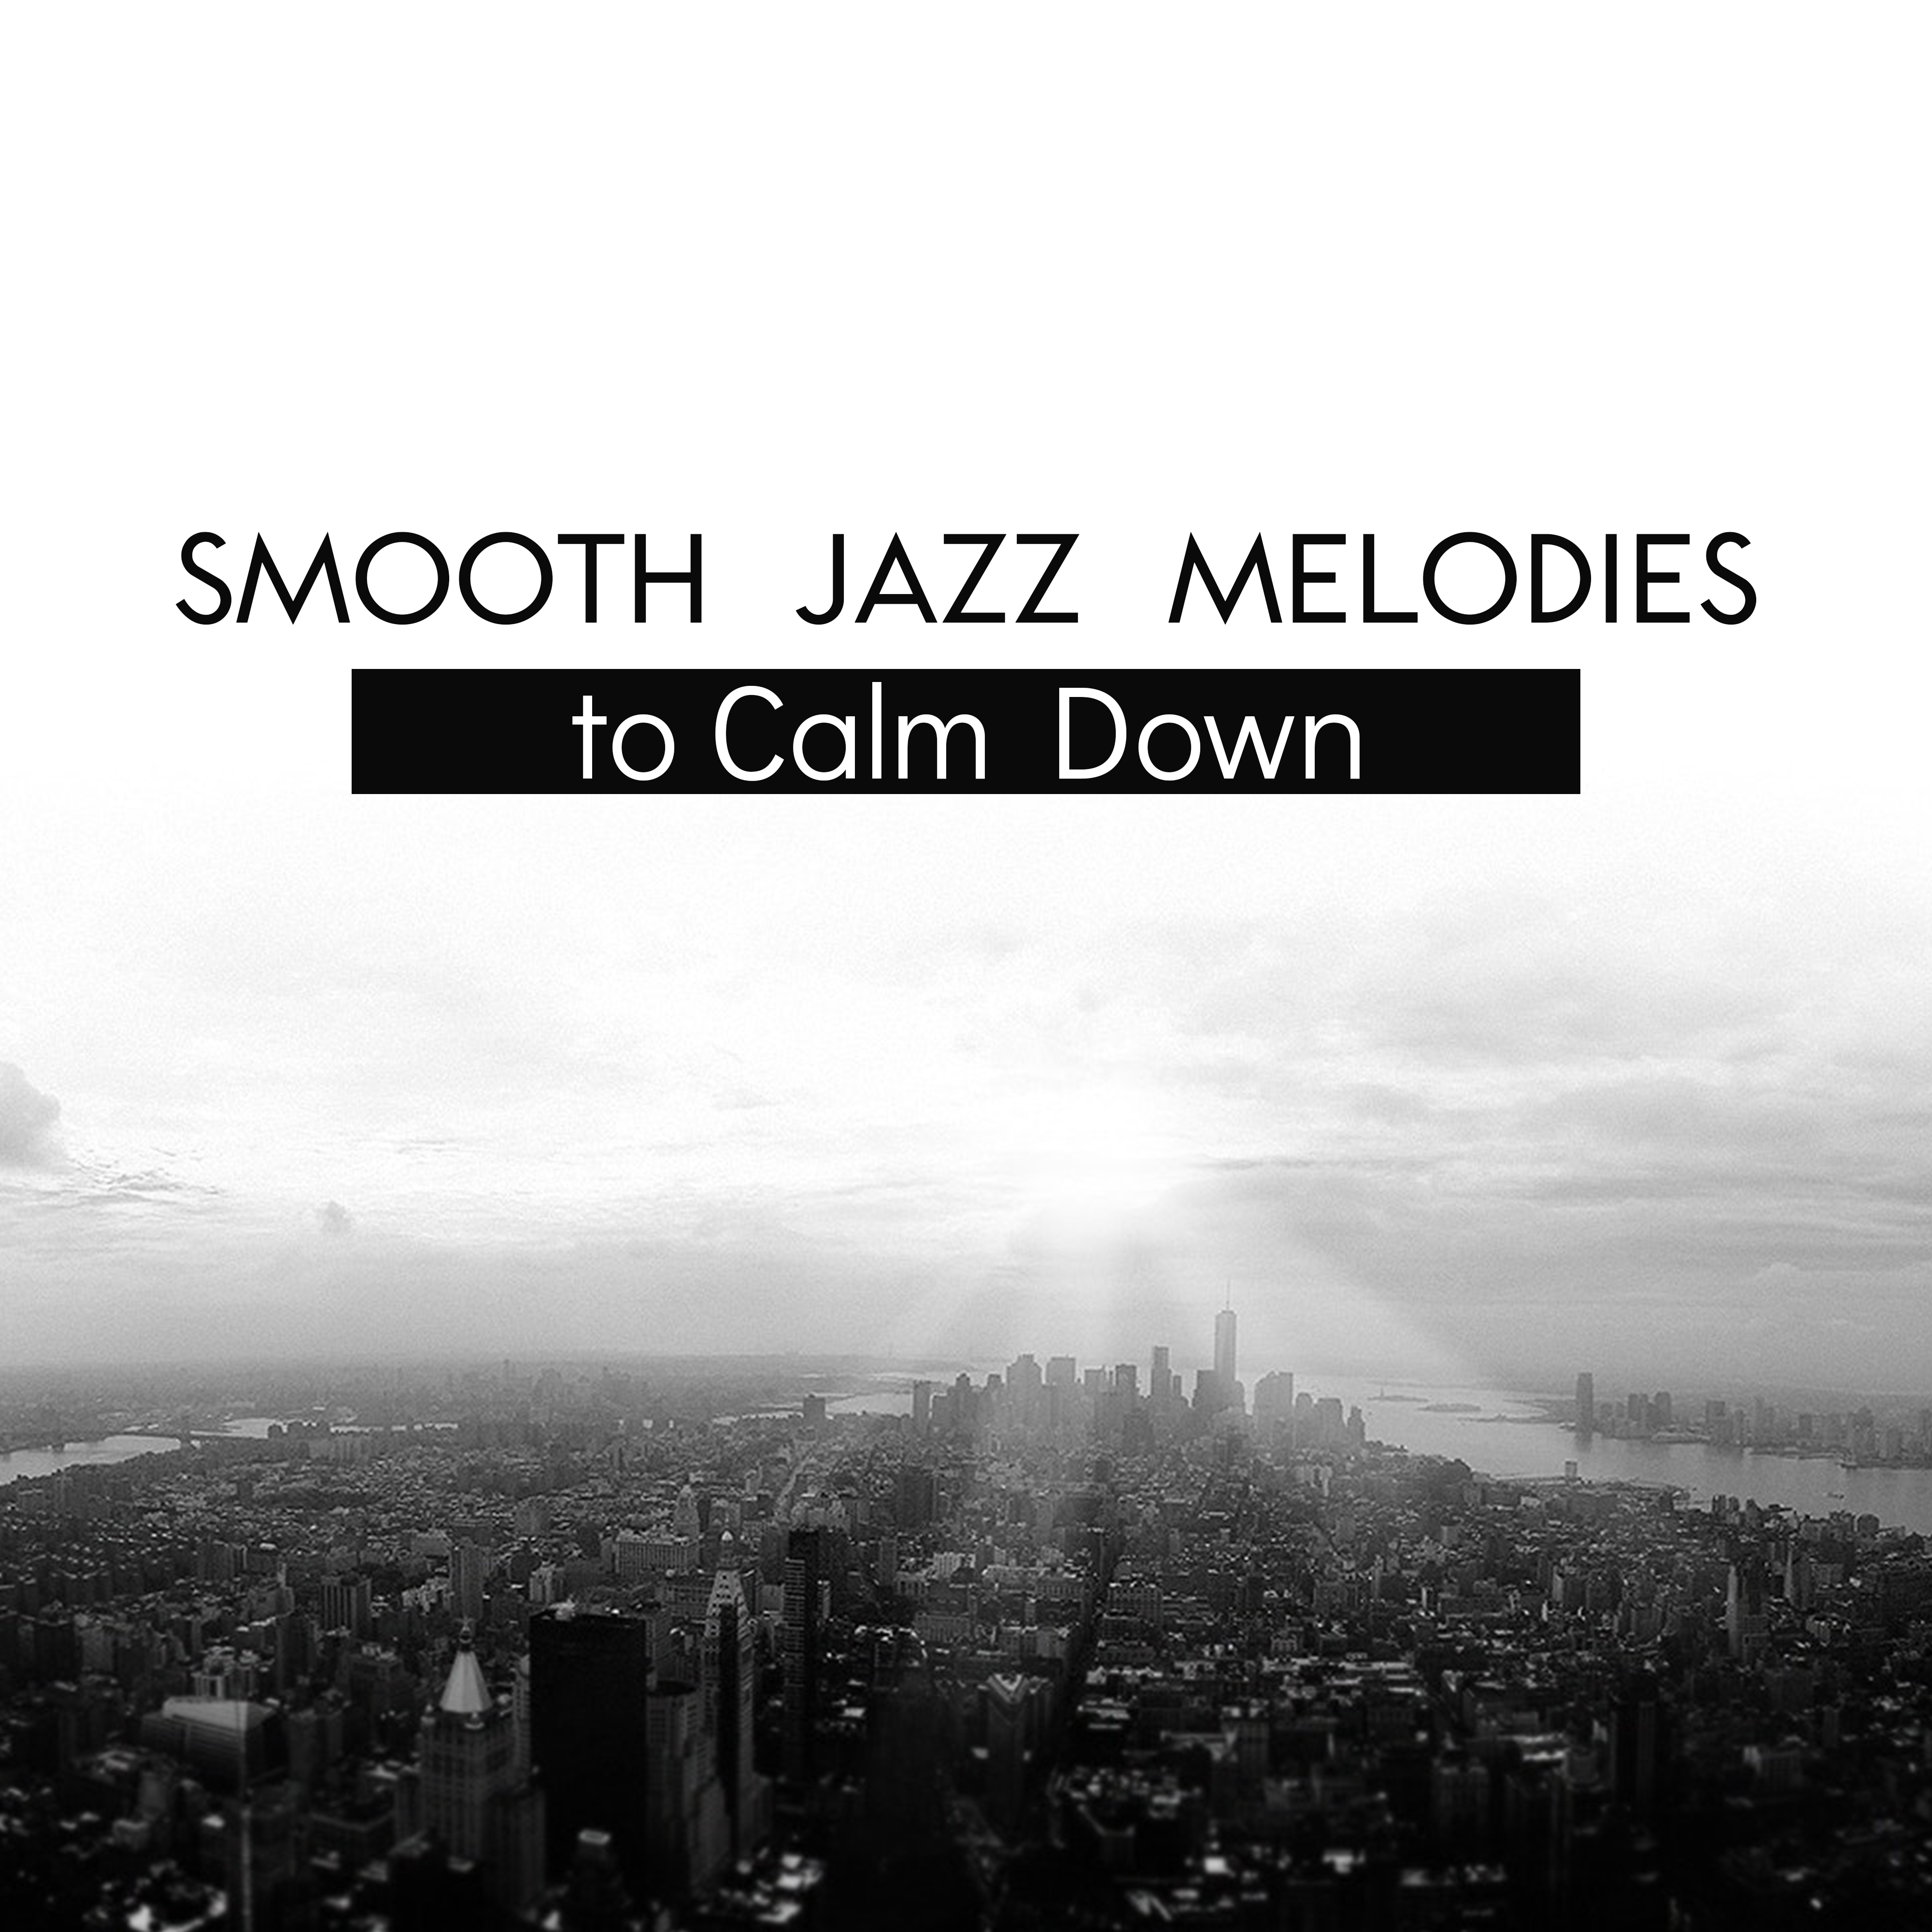 Smooth Jazz Melodies to Calm Down  Soothing Sounds to Relax, Peaceful Jazz Music, Instrumental Melodies